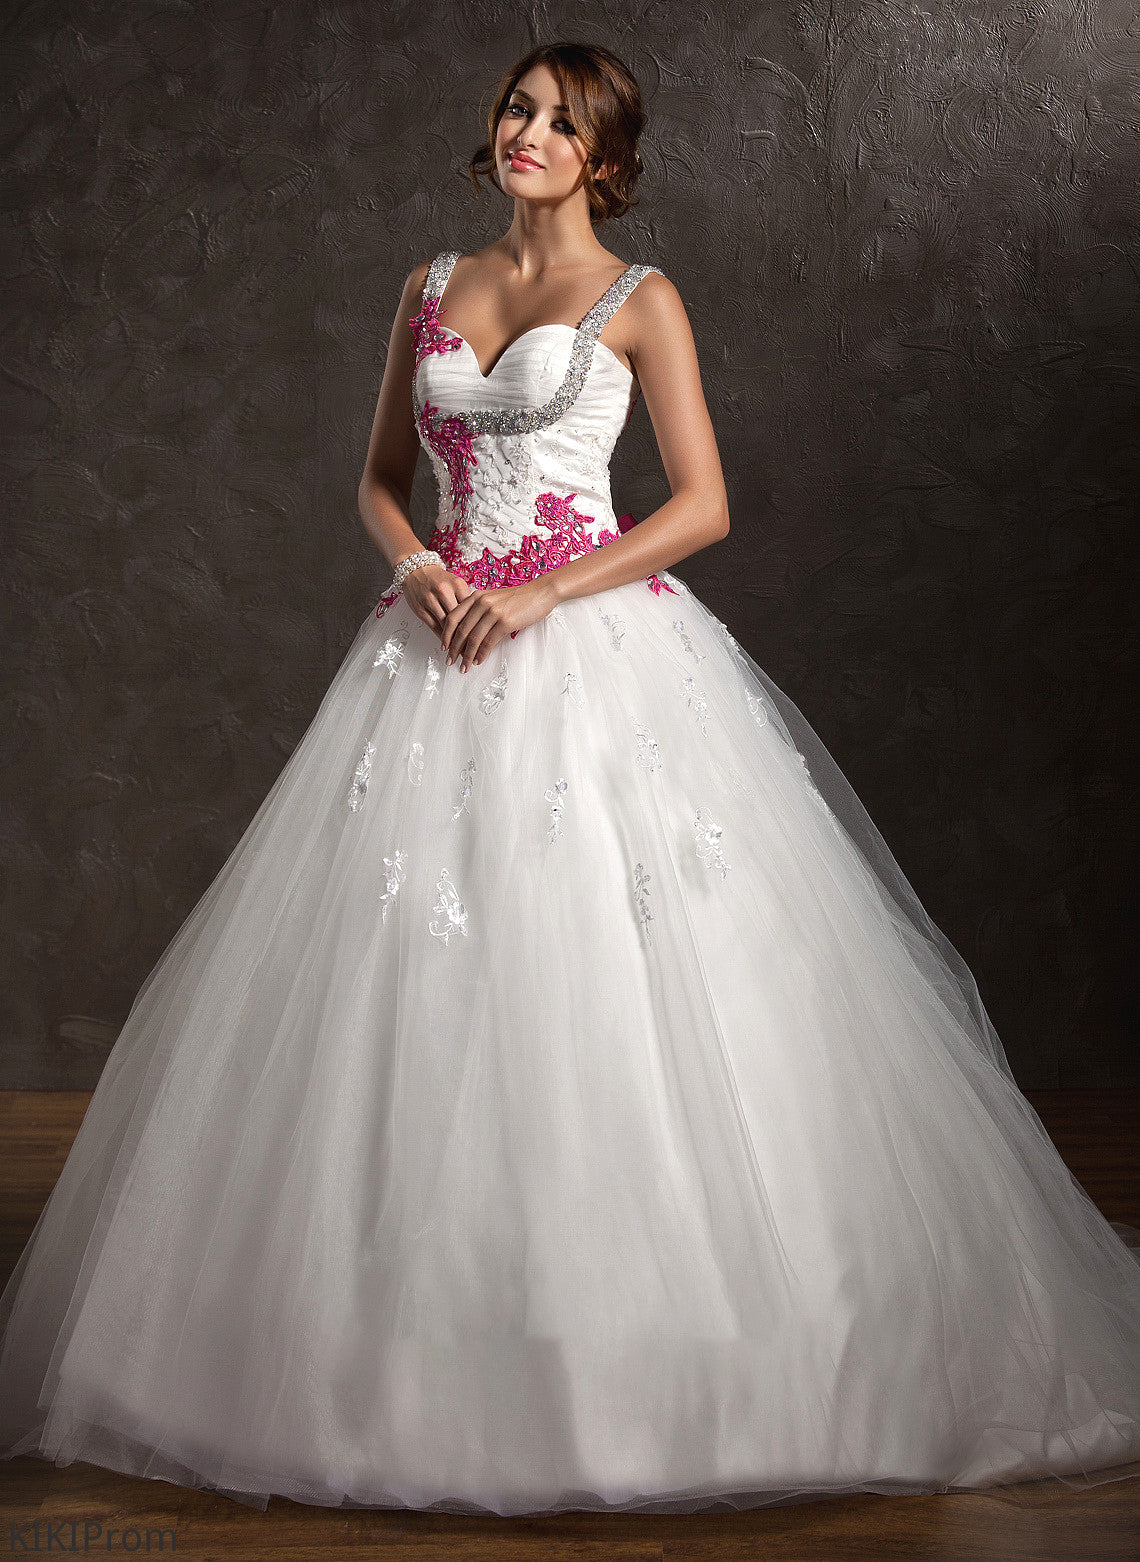 Chapel Sweetheart Bow(s) Ball-Gown/Princess Wedding Train Wedding Dresses Appliques Dress Tulle With Lauretta Lace Ruffle